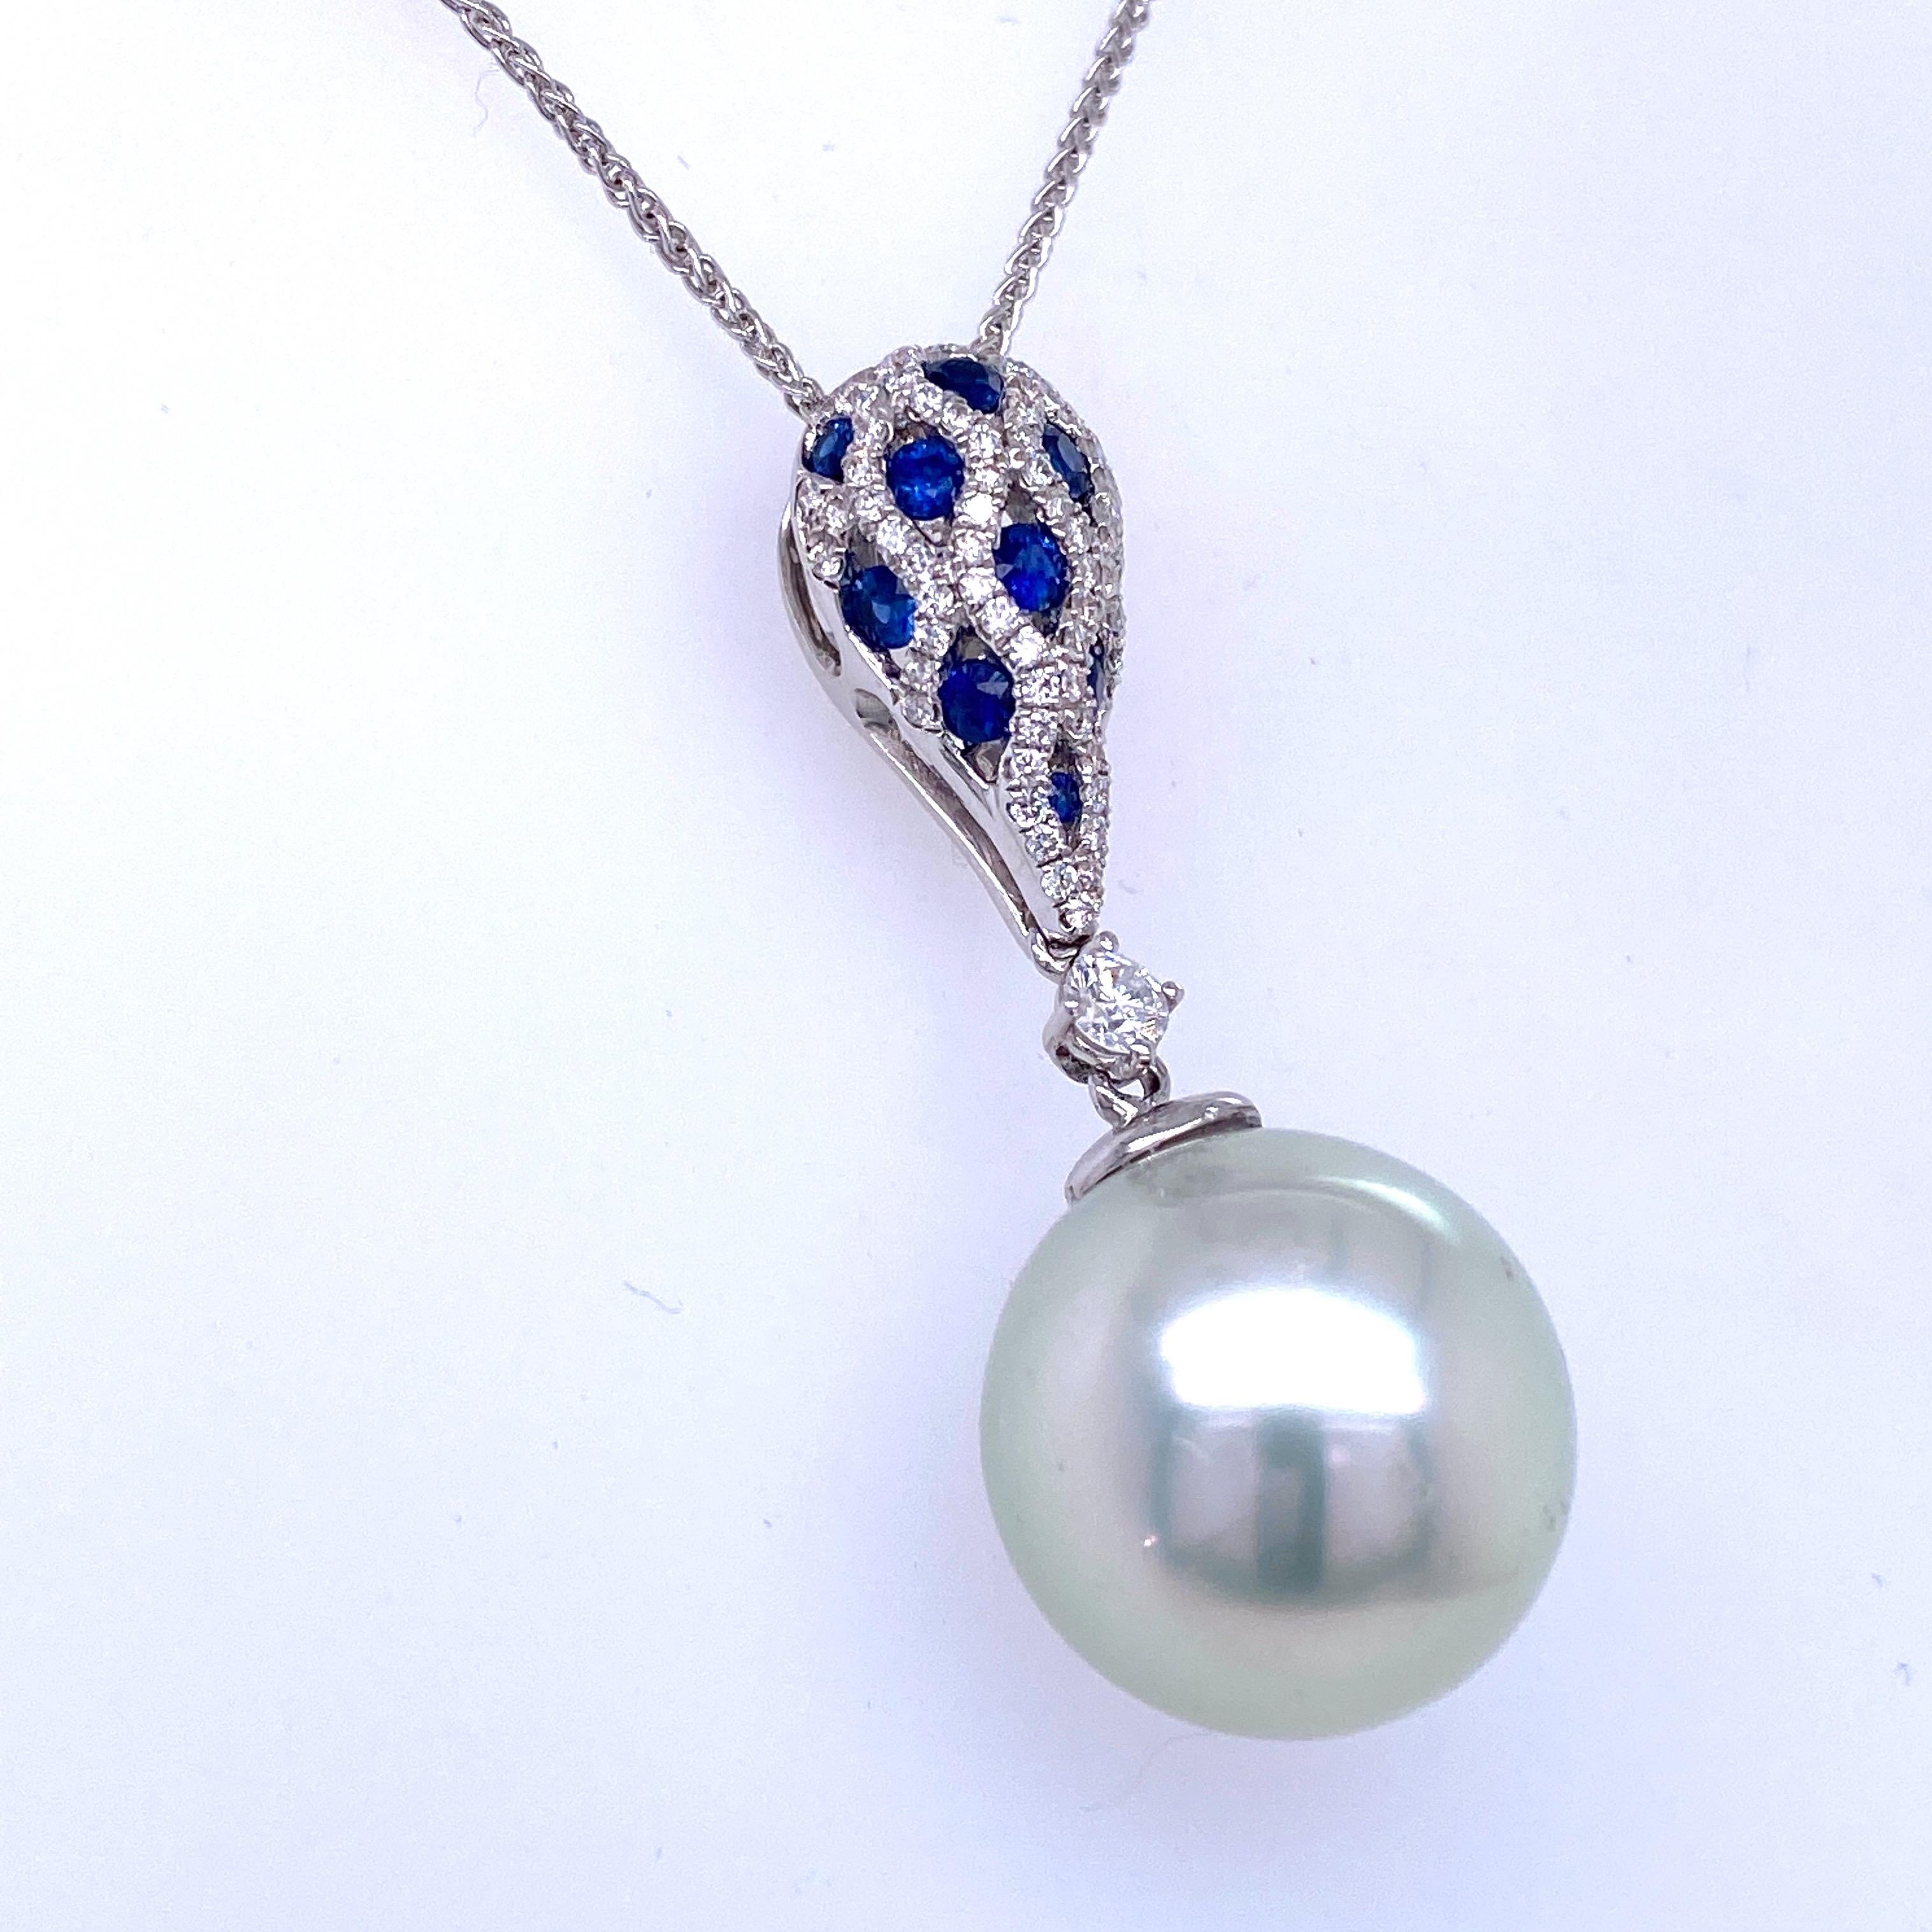 18K White gold pendant necklace featuring one South Sea Pearl measuring 13-14 mm flanked with sapphires weighing 0.34 carats and diamonds weighing 0.30 carats. 